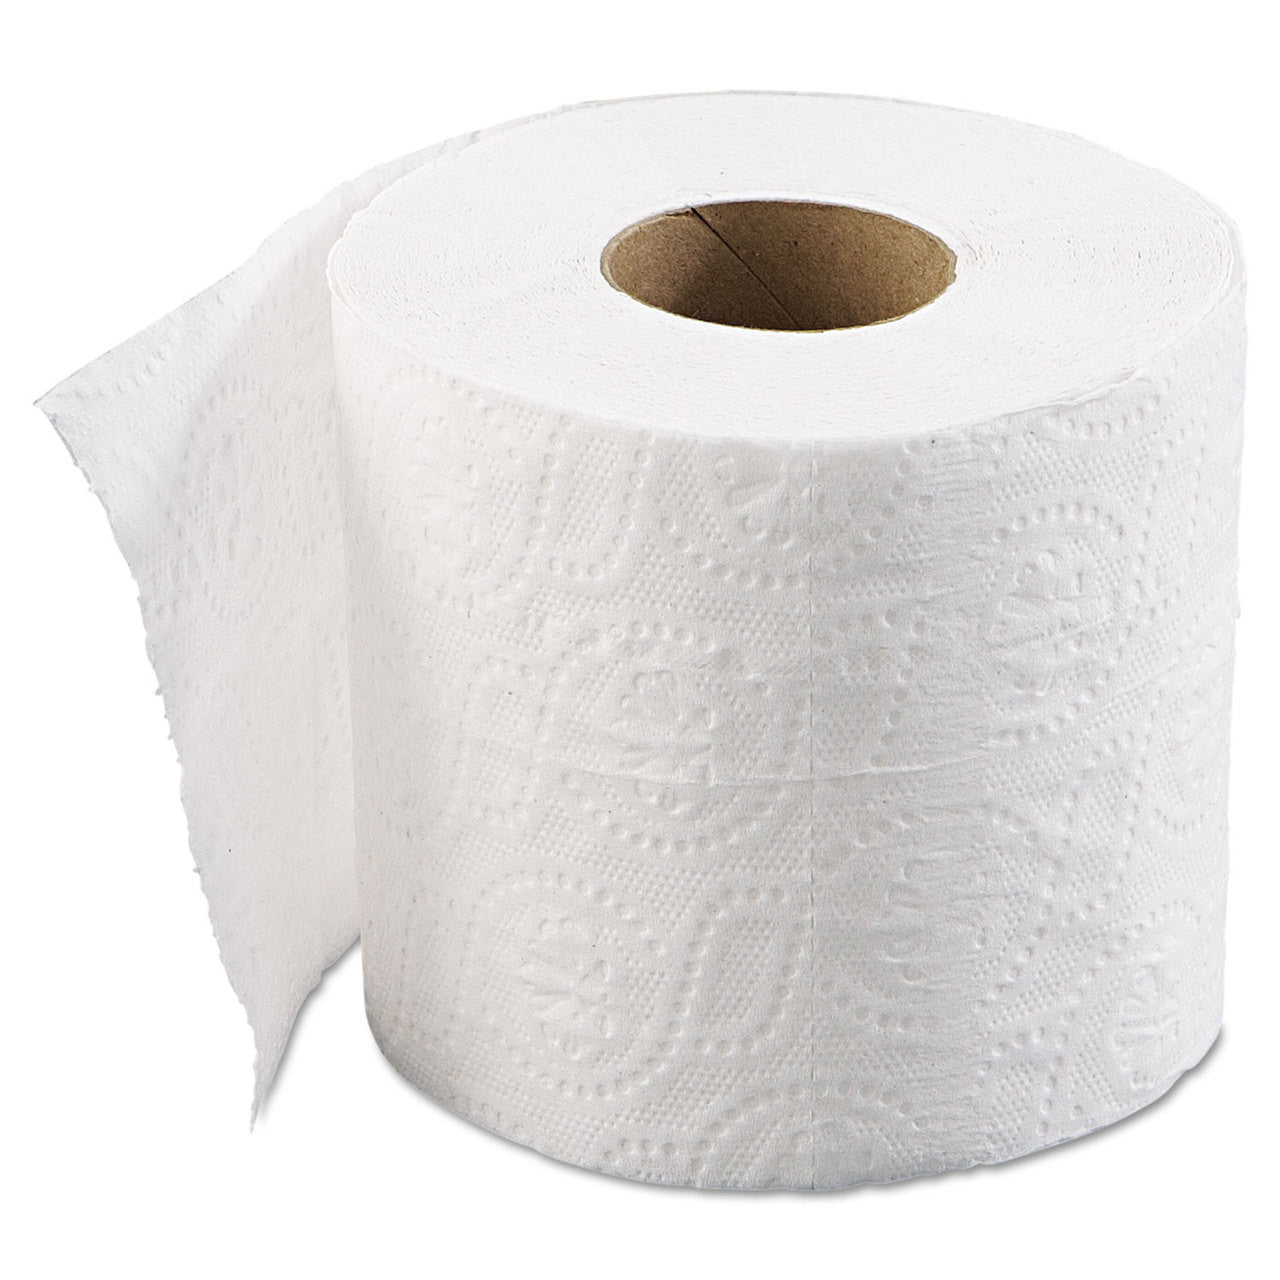 bah>soft toilet paper, brand depends on availability, per roll